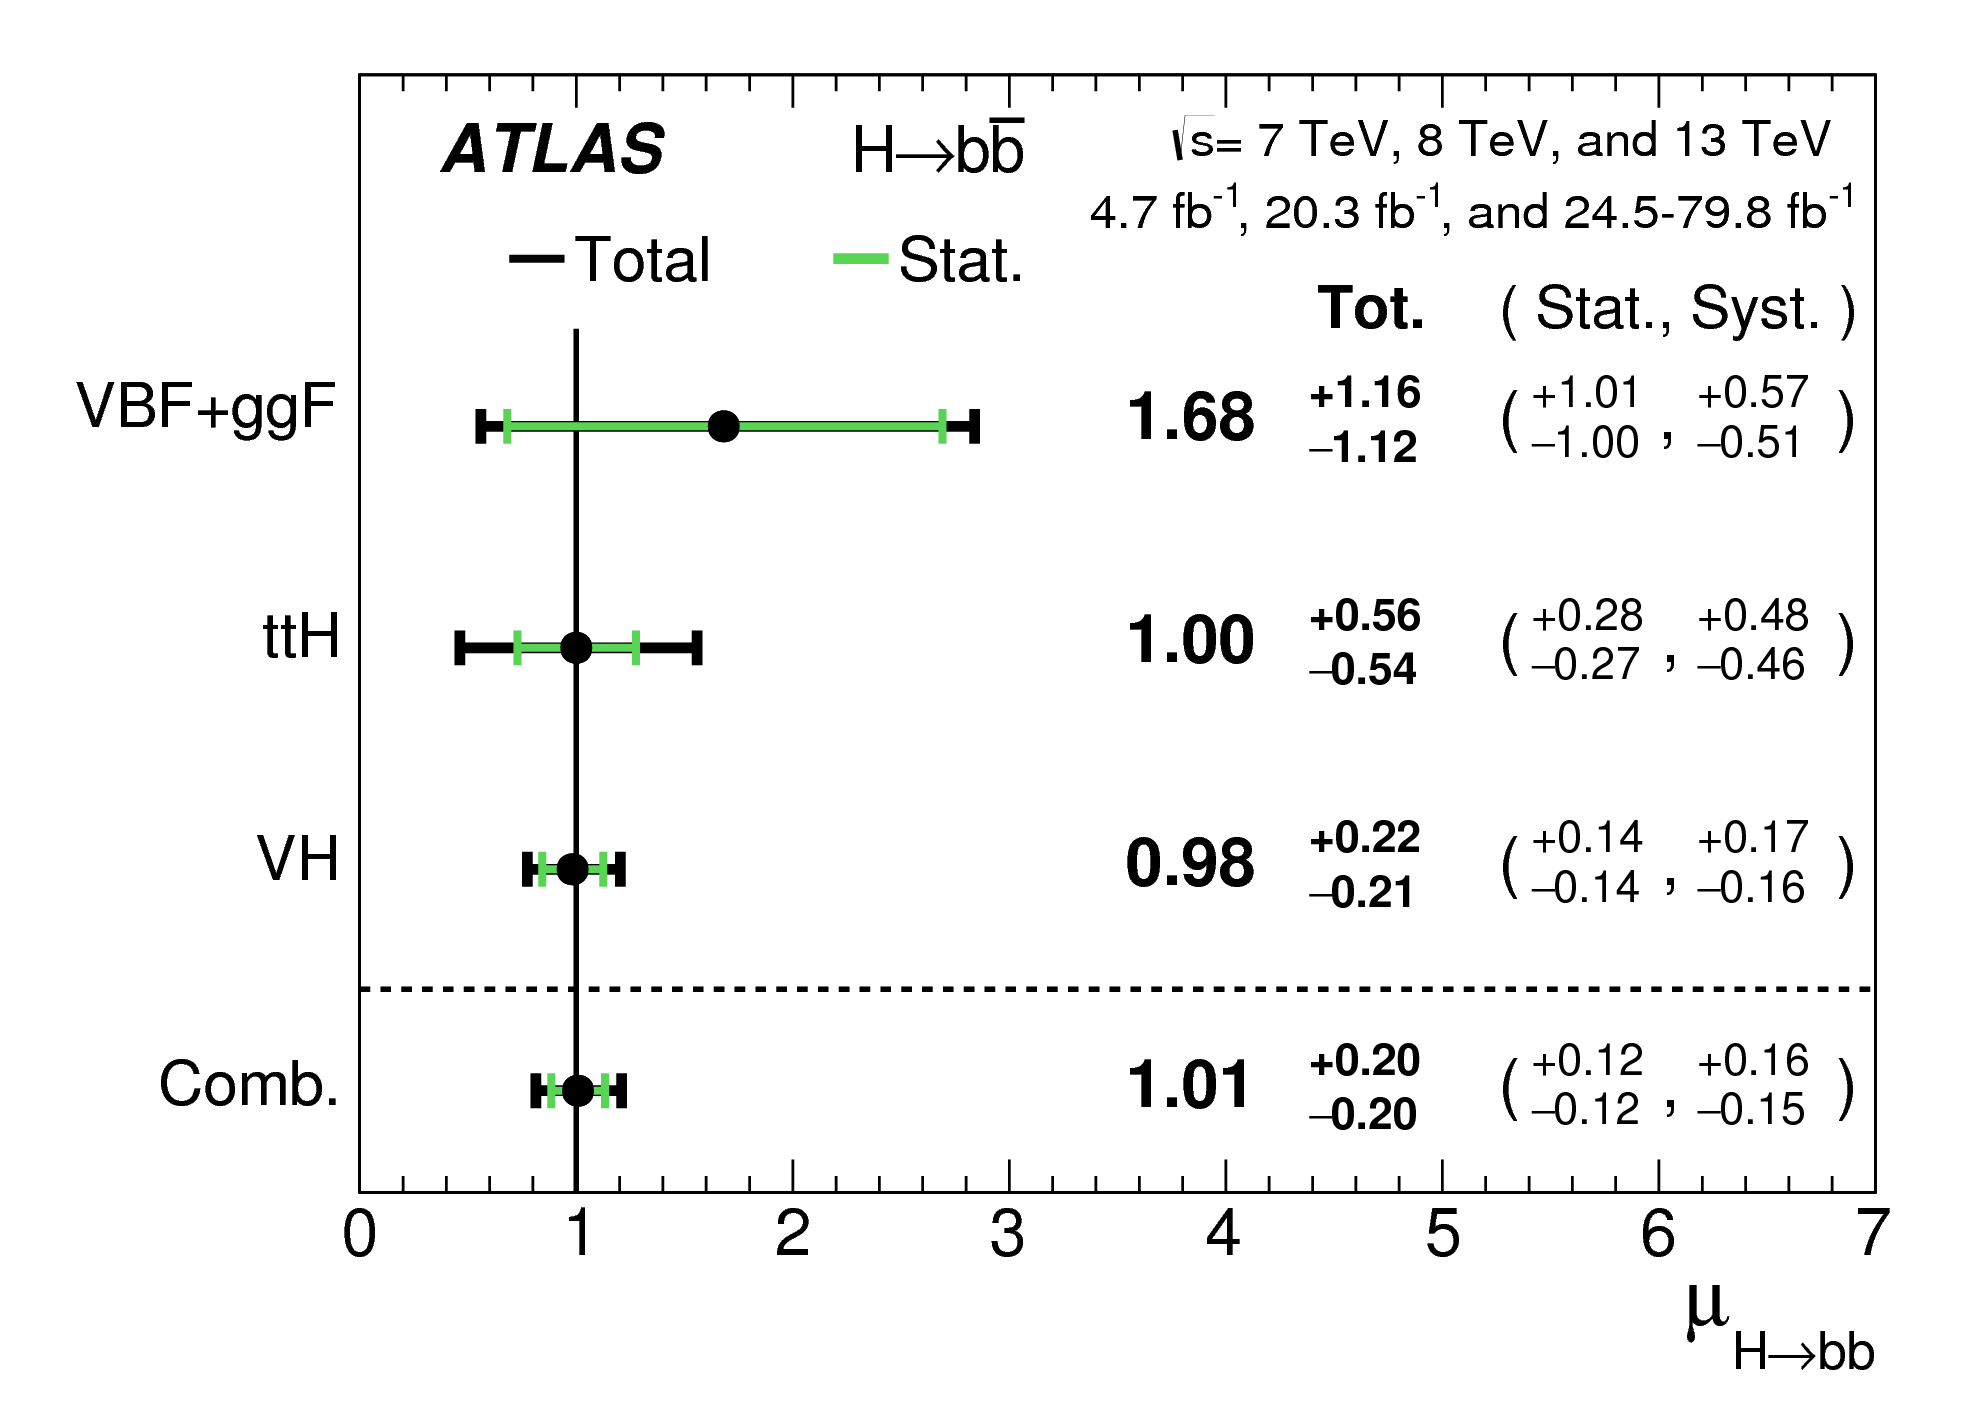 Signal strength for various productions with Higgs decays to bb.